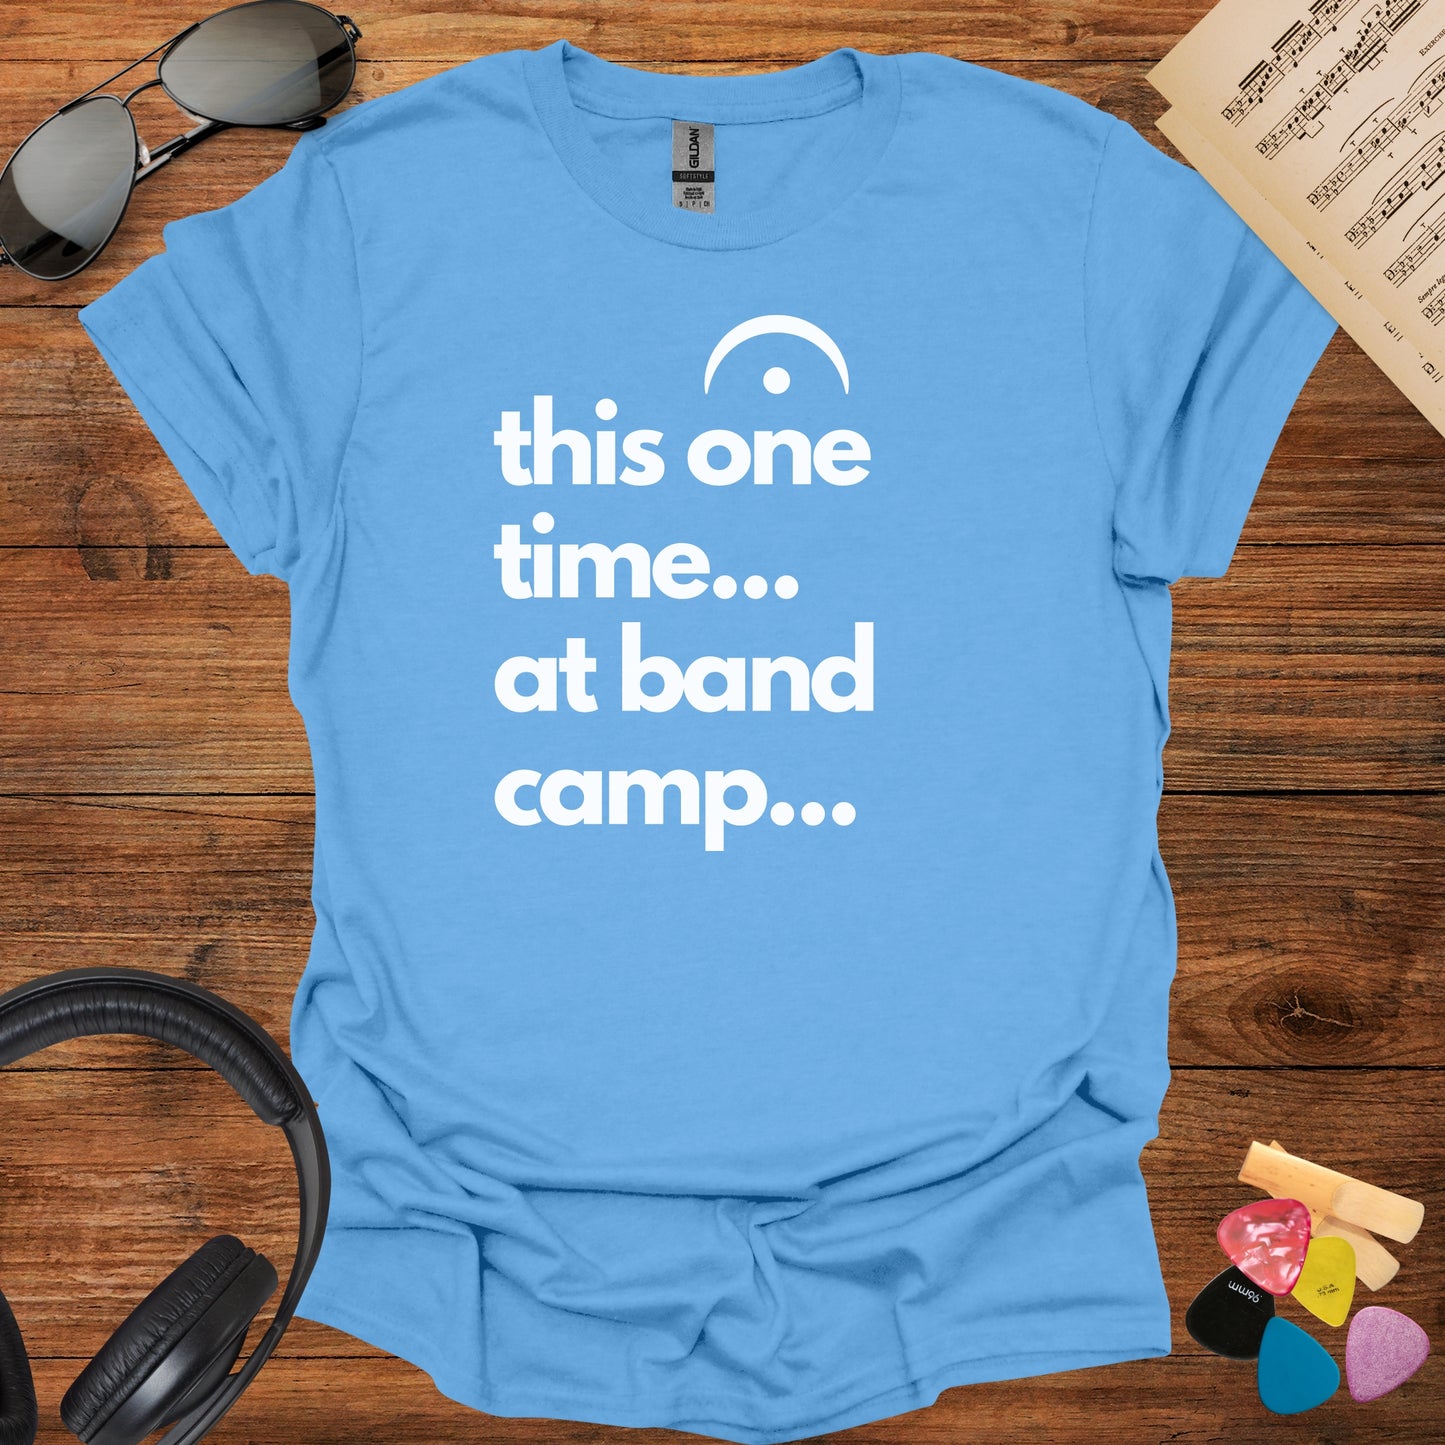 One Time at Band Camp